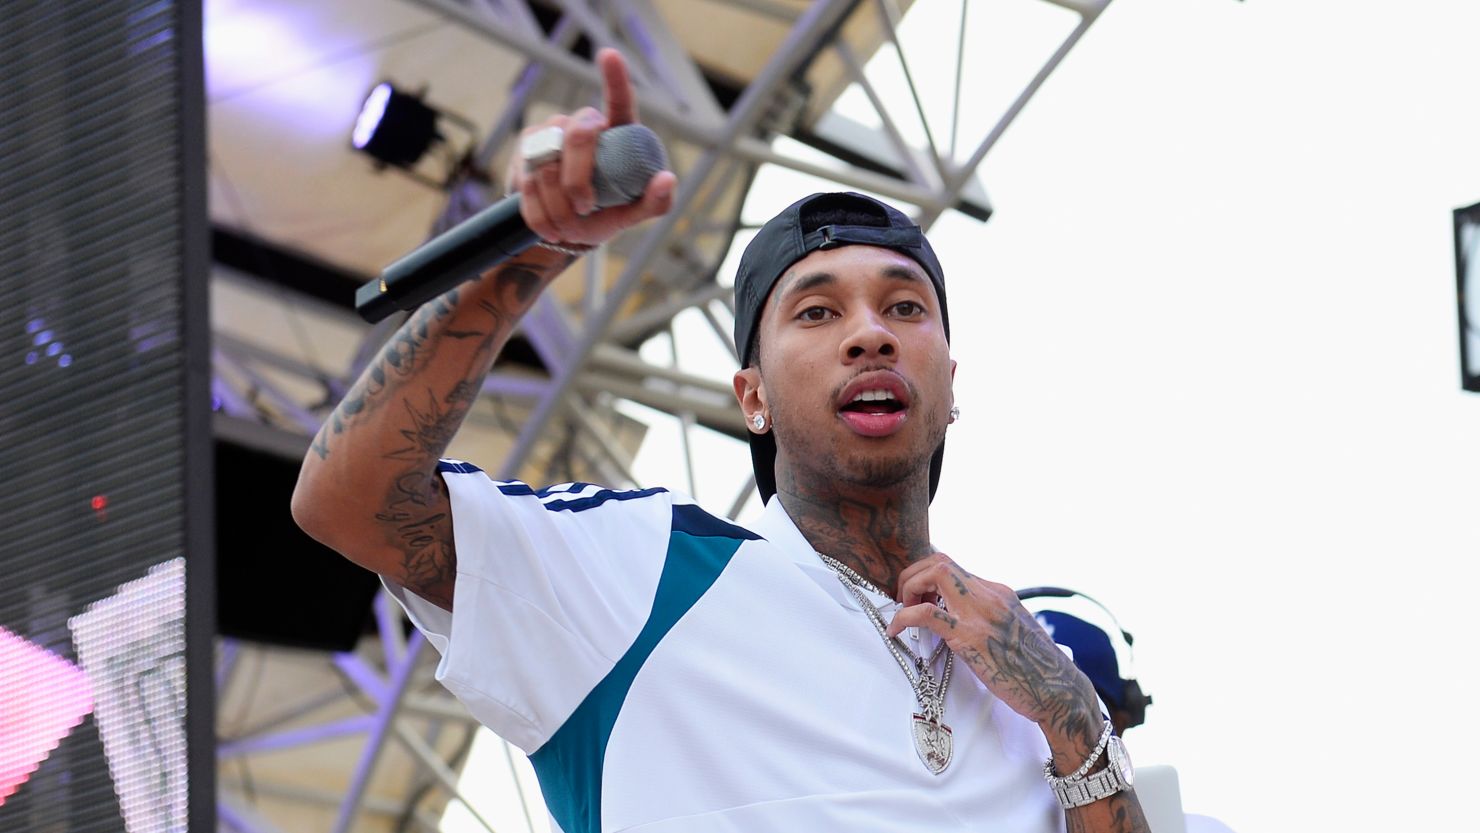 Rapper Tyga performs at the Mandalay Bay Resort and Casino in Las Vegas on March 26, 2017.